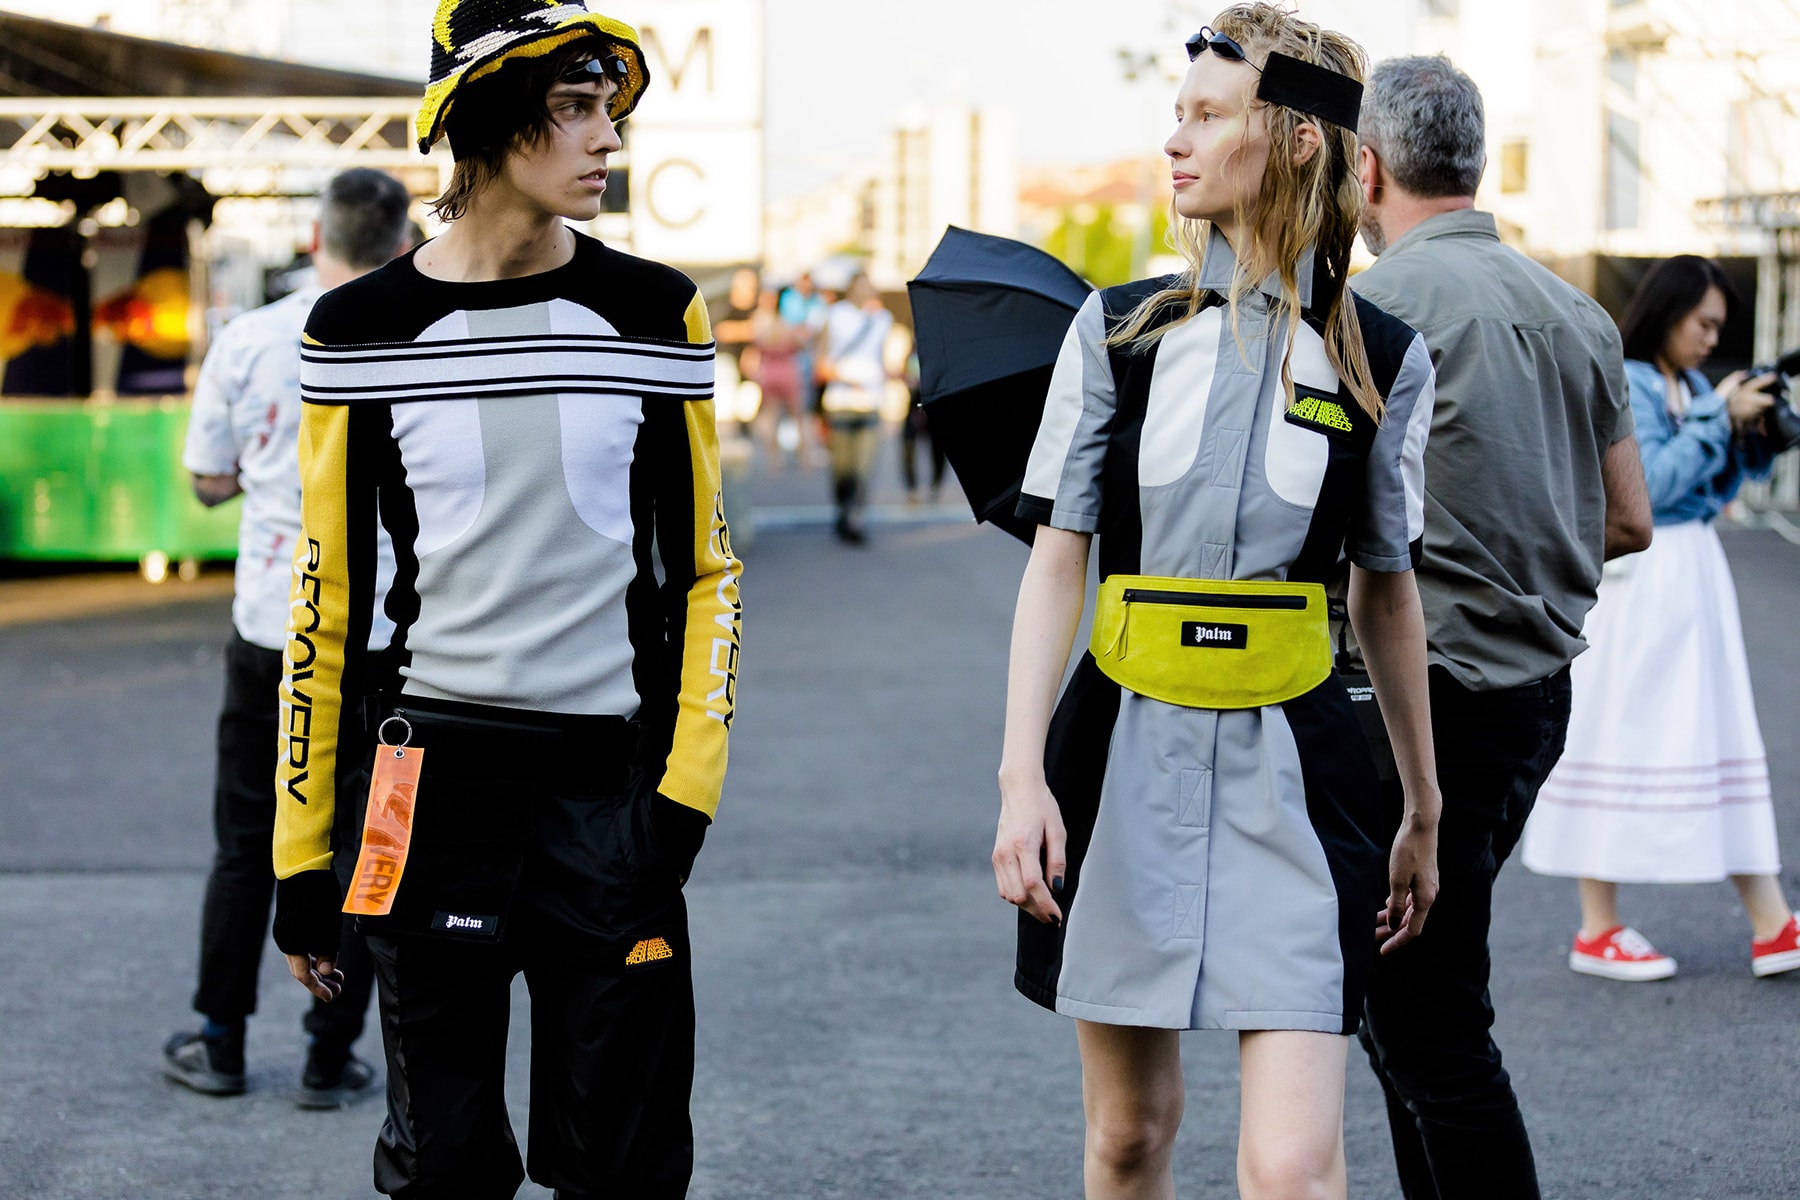 palm angels spring summer 2019 milan fashion week striped orange turtle neck black tanning bed sunglasses goggles woven hat knit strap grey white black yellow long sleeve shirt waist fanny bag pack dress recovery tag pants